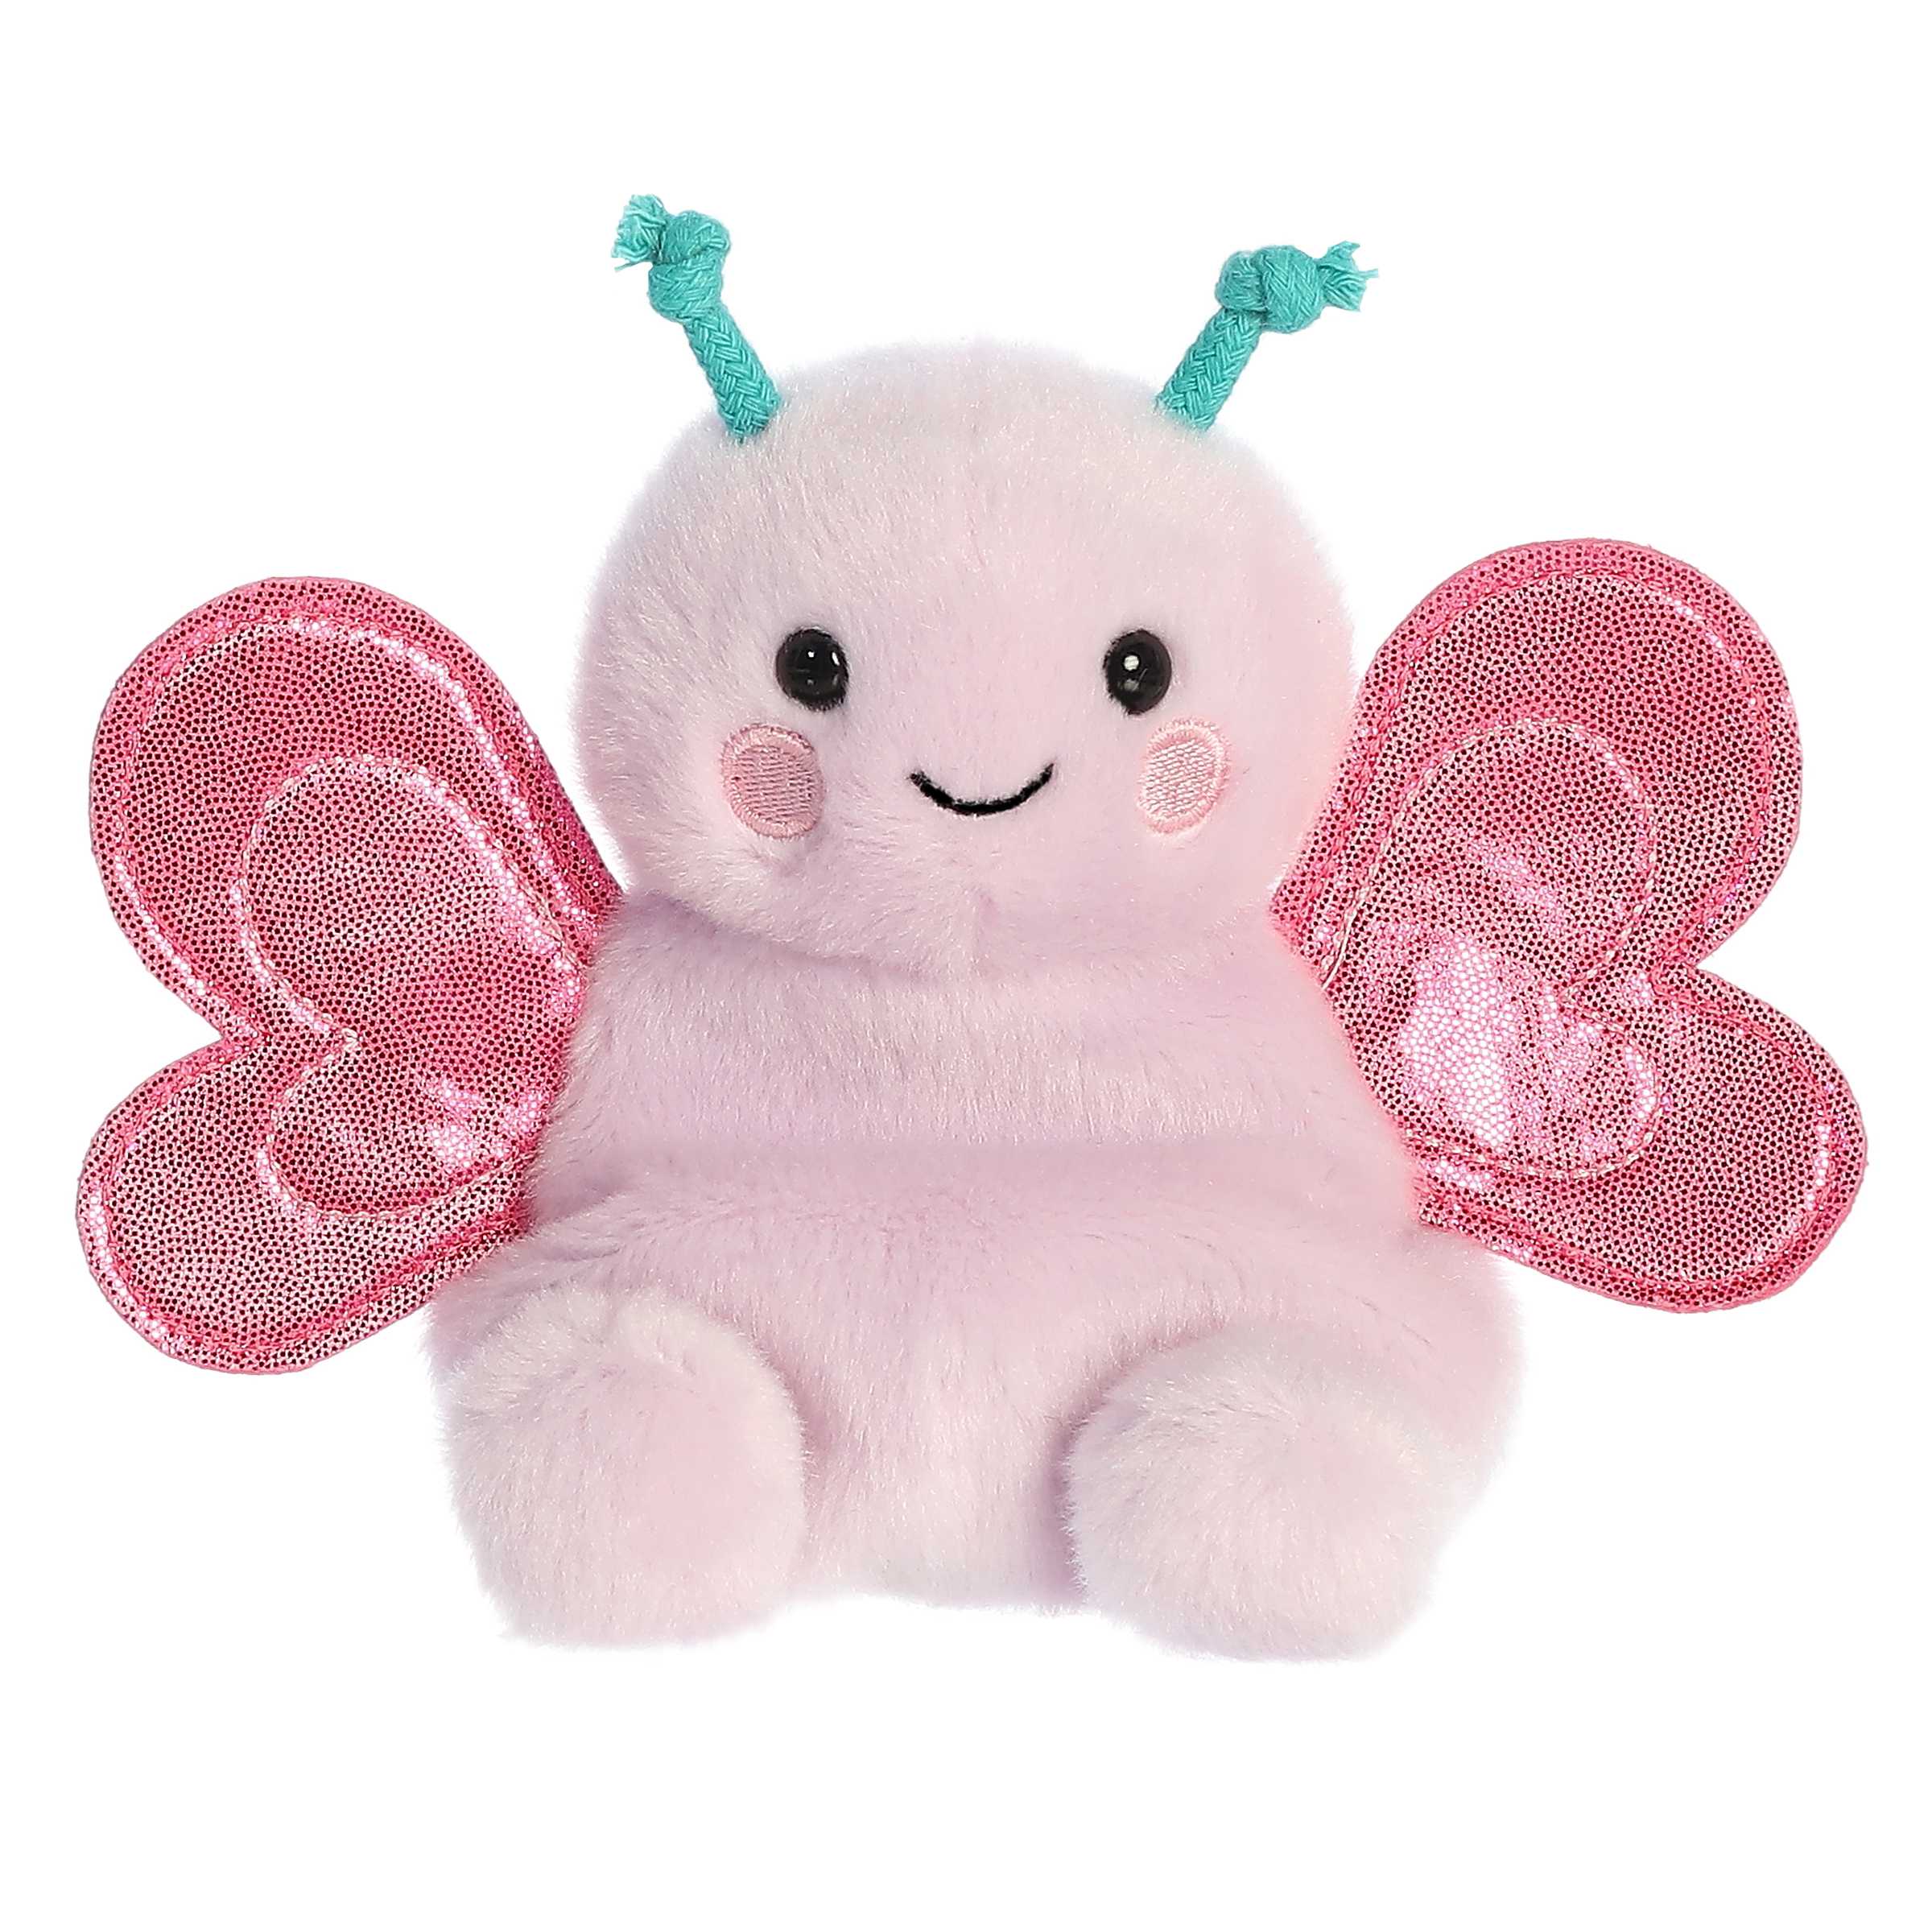 Colorful mini butterfly plush toy with light purple fur, sparkly pink wings, aqua blue antennae and embroidered smiling face.